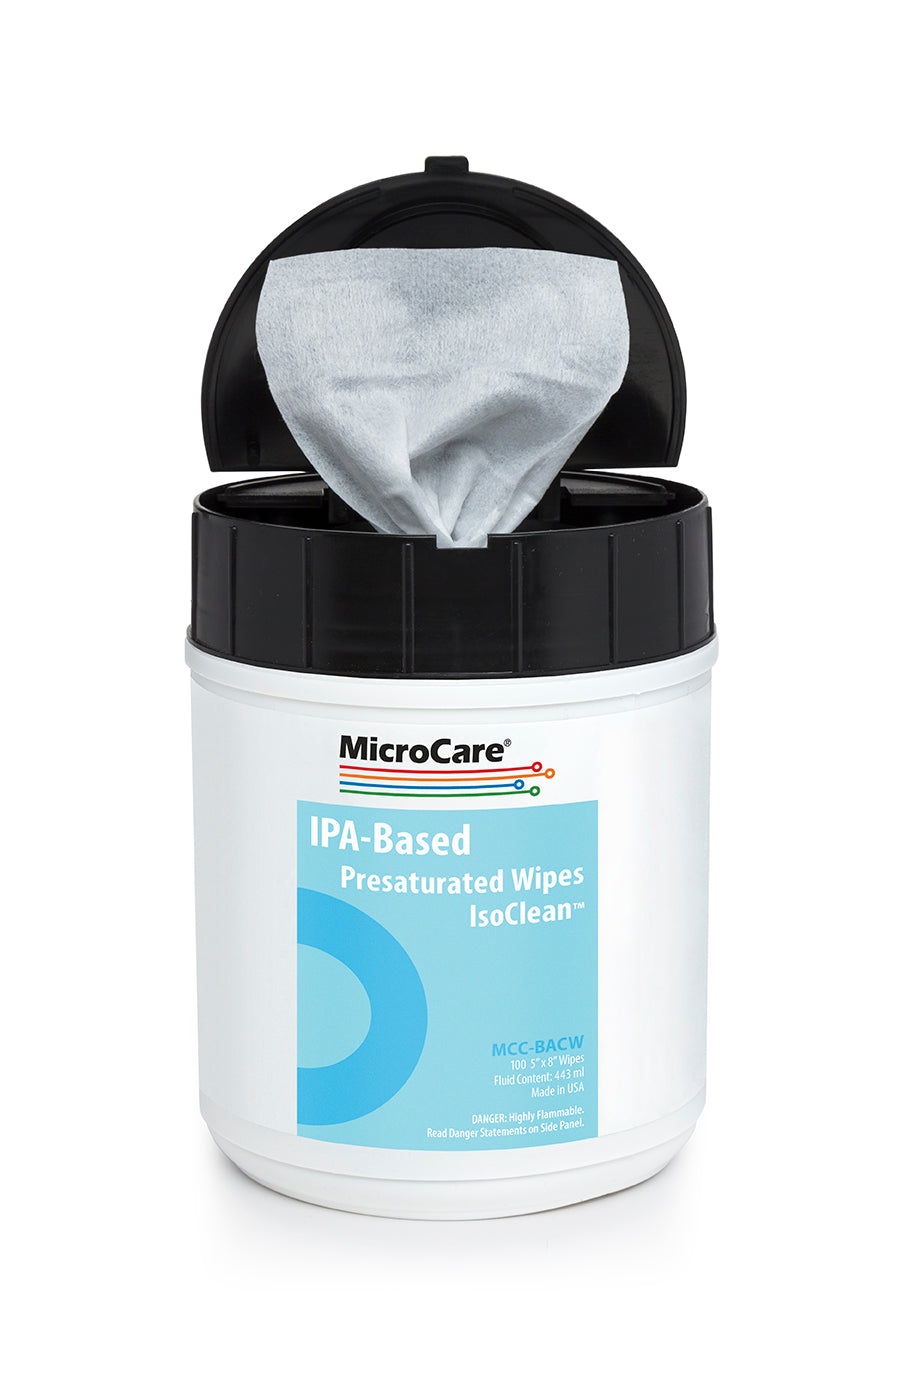 MicroCare MCC-BACW IsoClean Hi-Purity 99% Isopropyl Alcohol Cleaning Wipes, Tub of 100, 8" x 5" Wipes